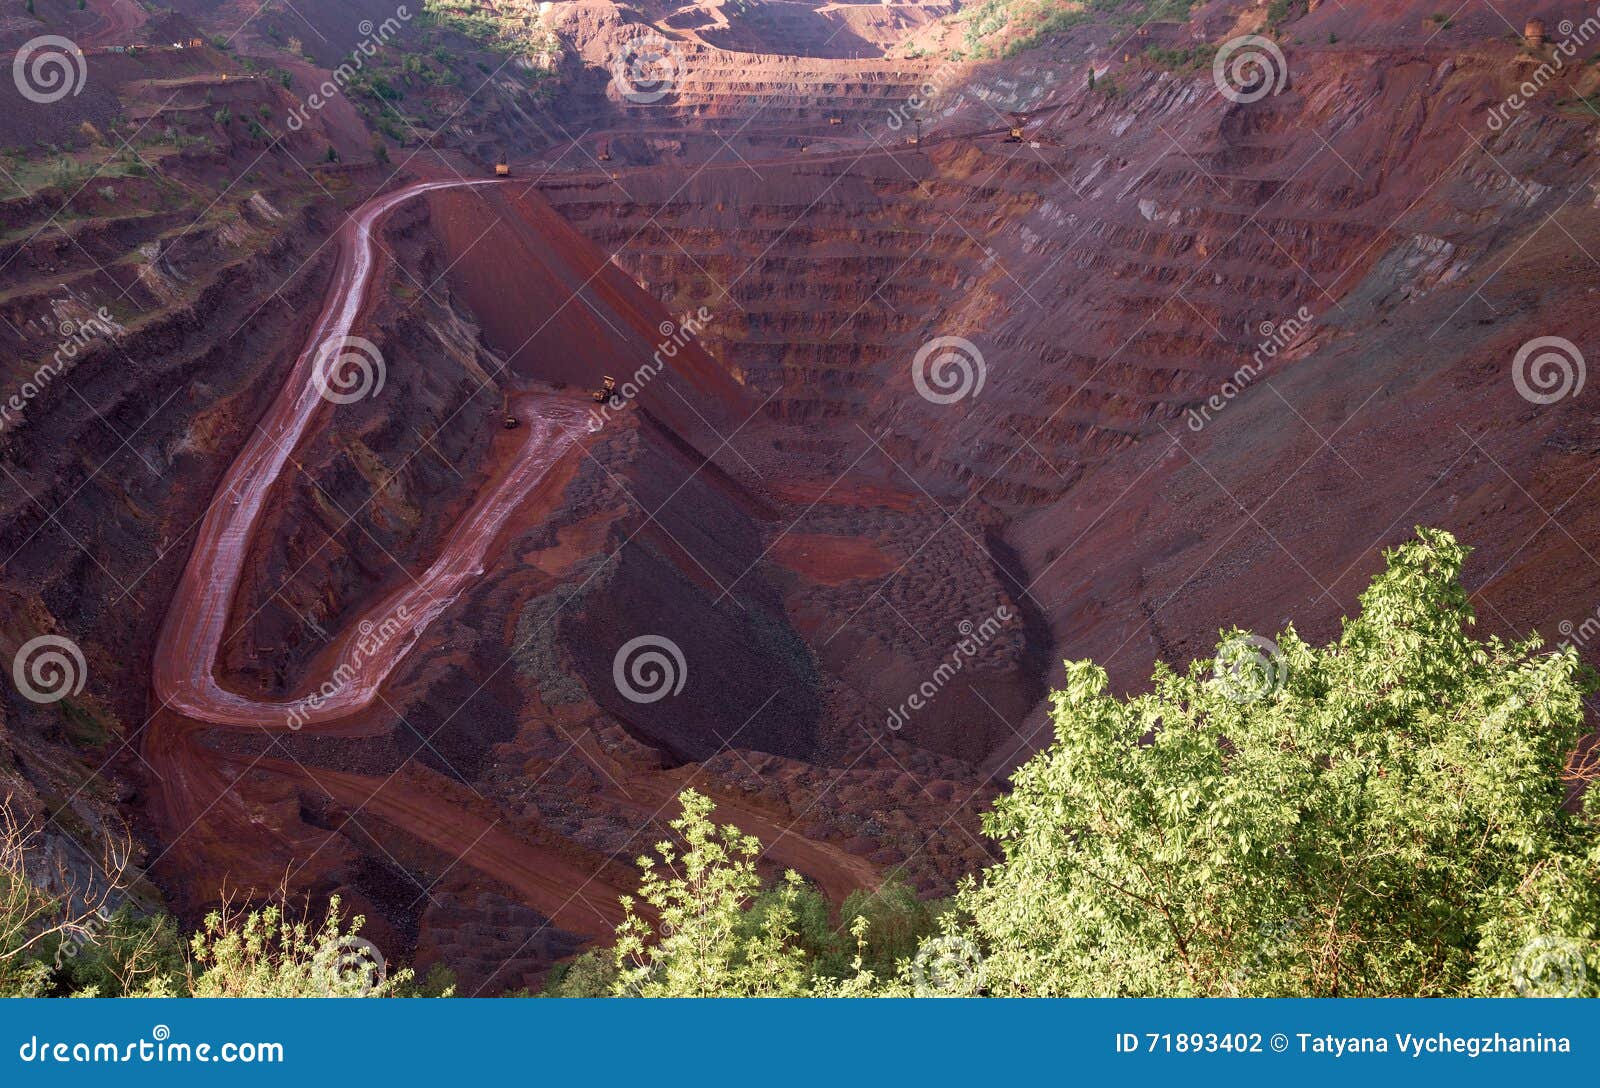 view inside the iron oxid quarry with trails on slopes